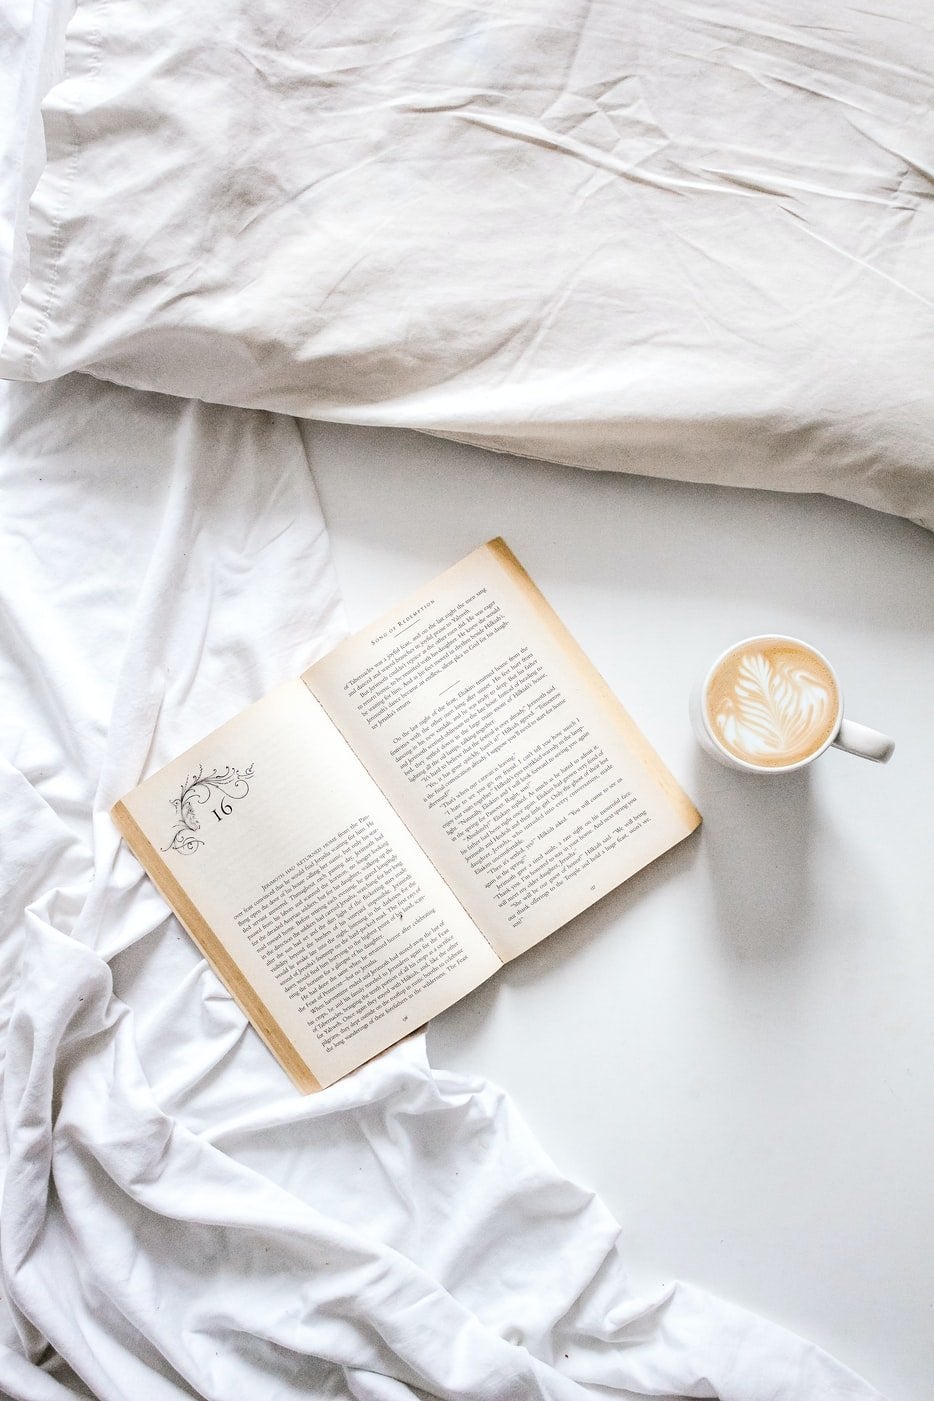 book with latte in bed